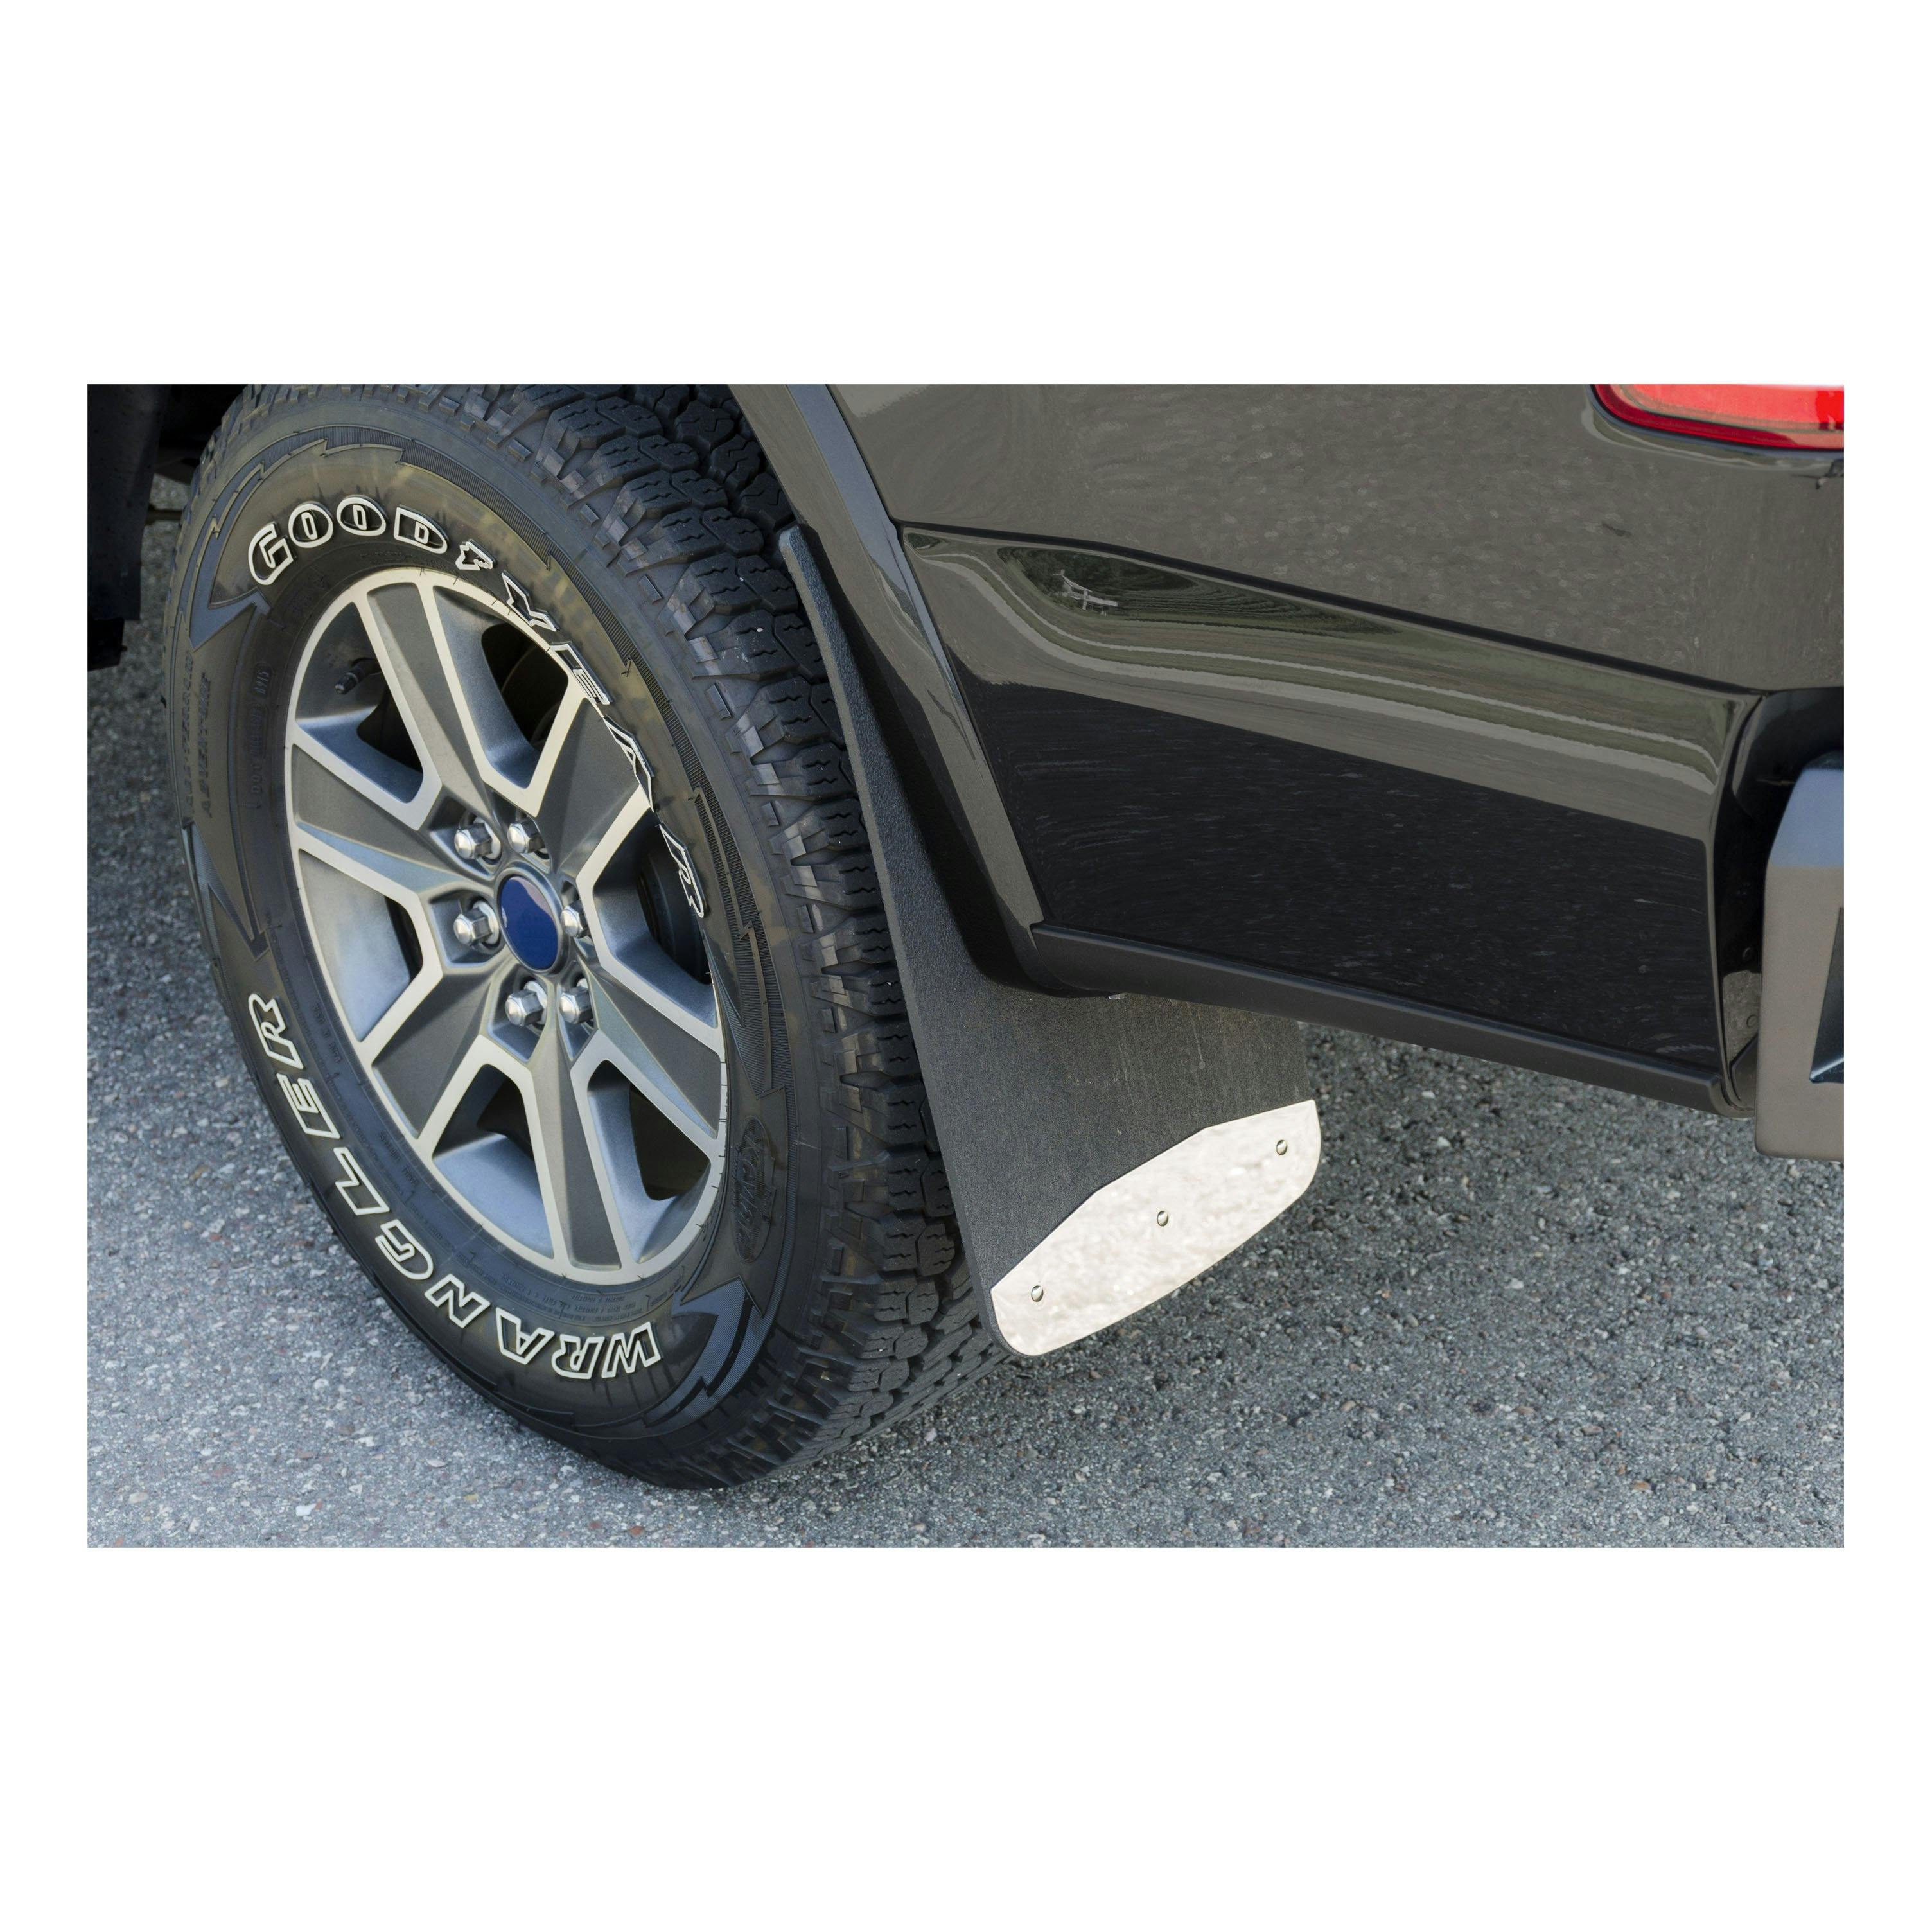 1 Pair Luverne Truck Equipment Truck Mud Flaps LUVERNE 251720 Textured Rubber Mud Guards with Polished Stainless Steel Plates